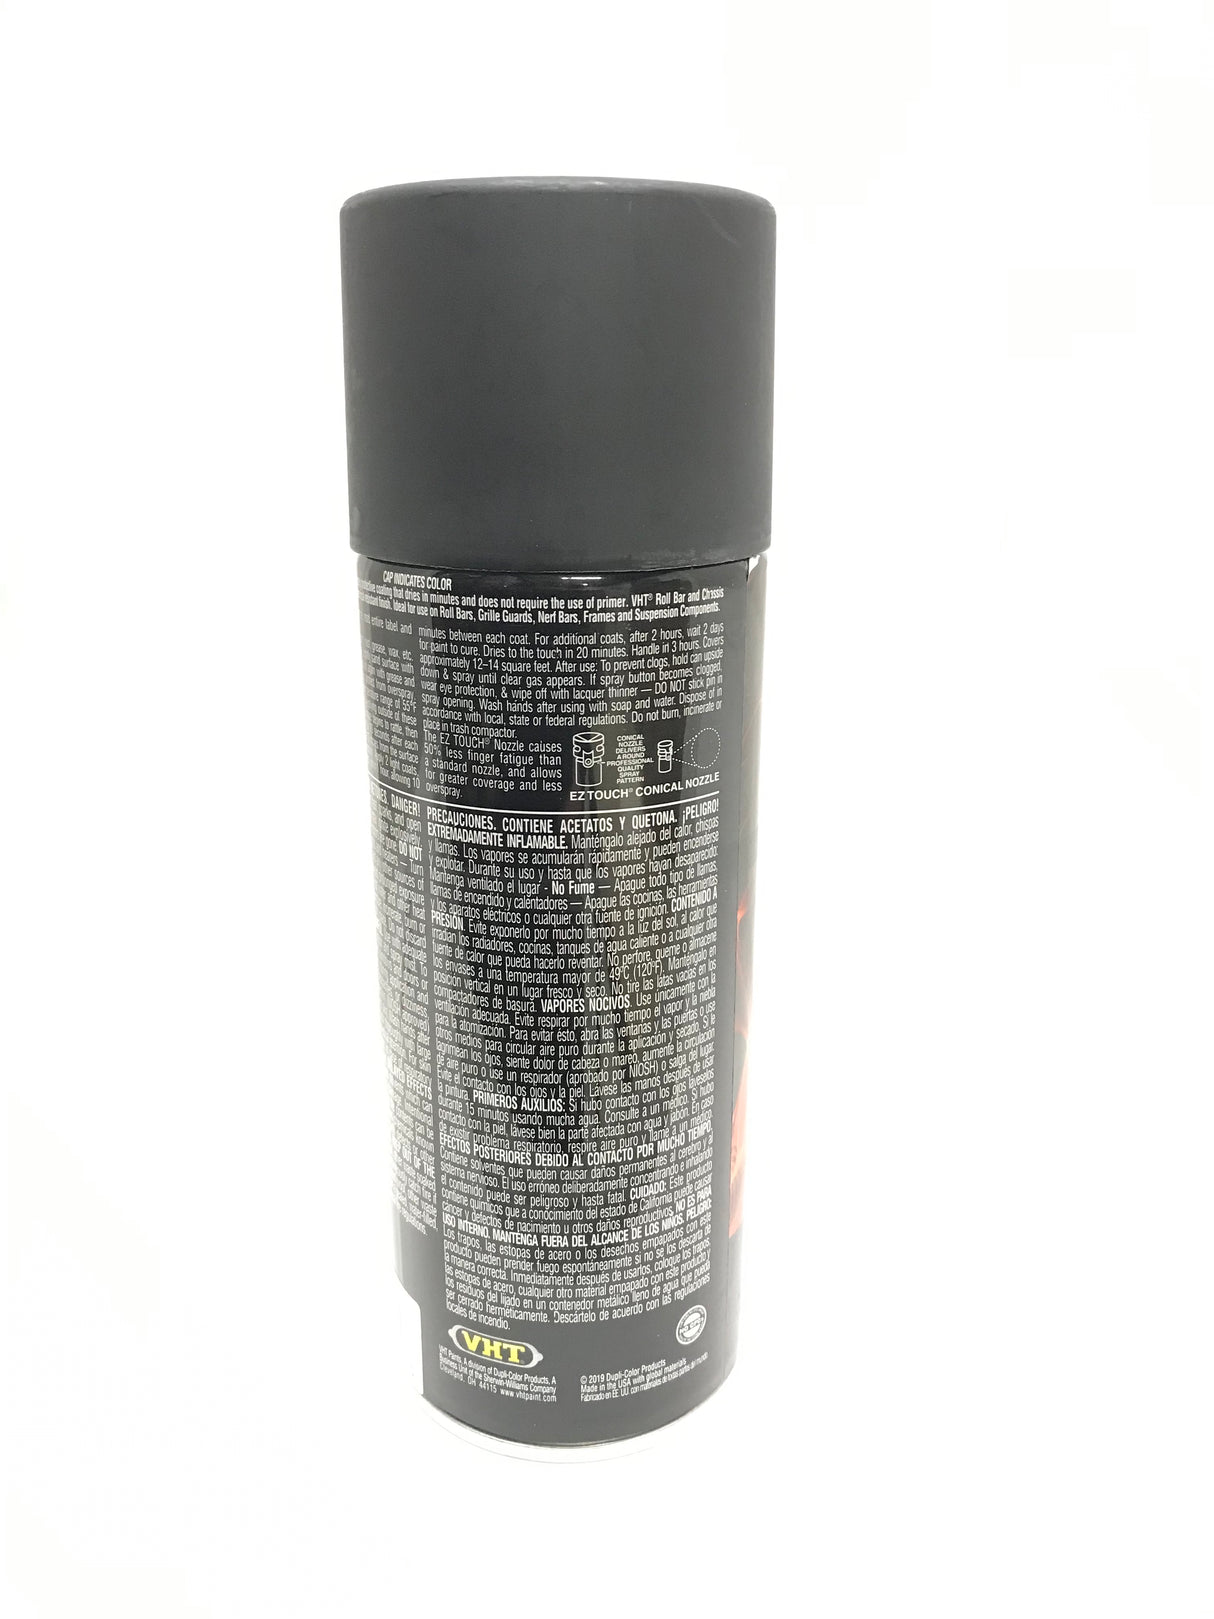 VHT SP671 High Temperature SATIN BLACK Roll Bar and Chassis Paint - 11 oz